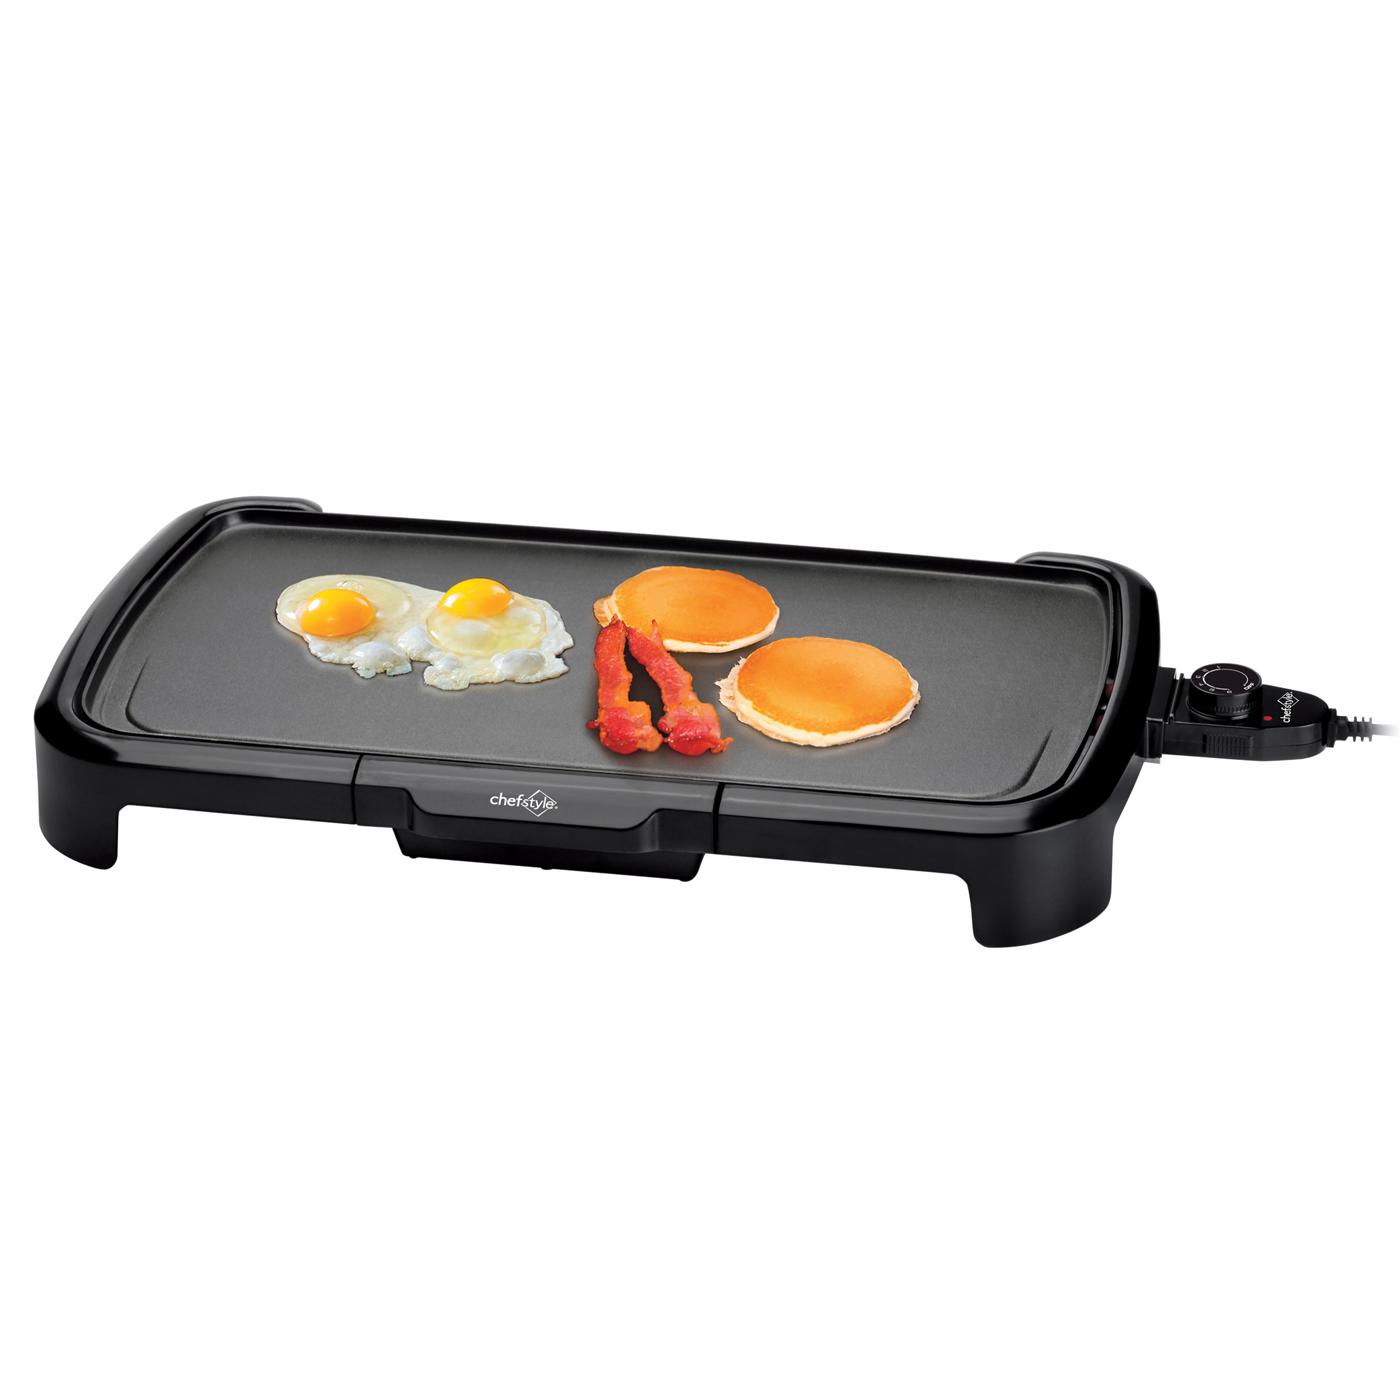 chefstyle Non-Stick Black Griddle; image 1 of 2